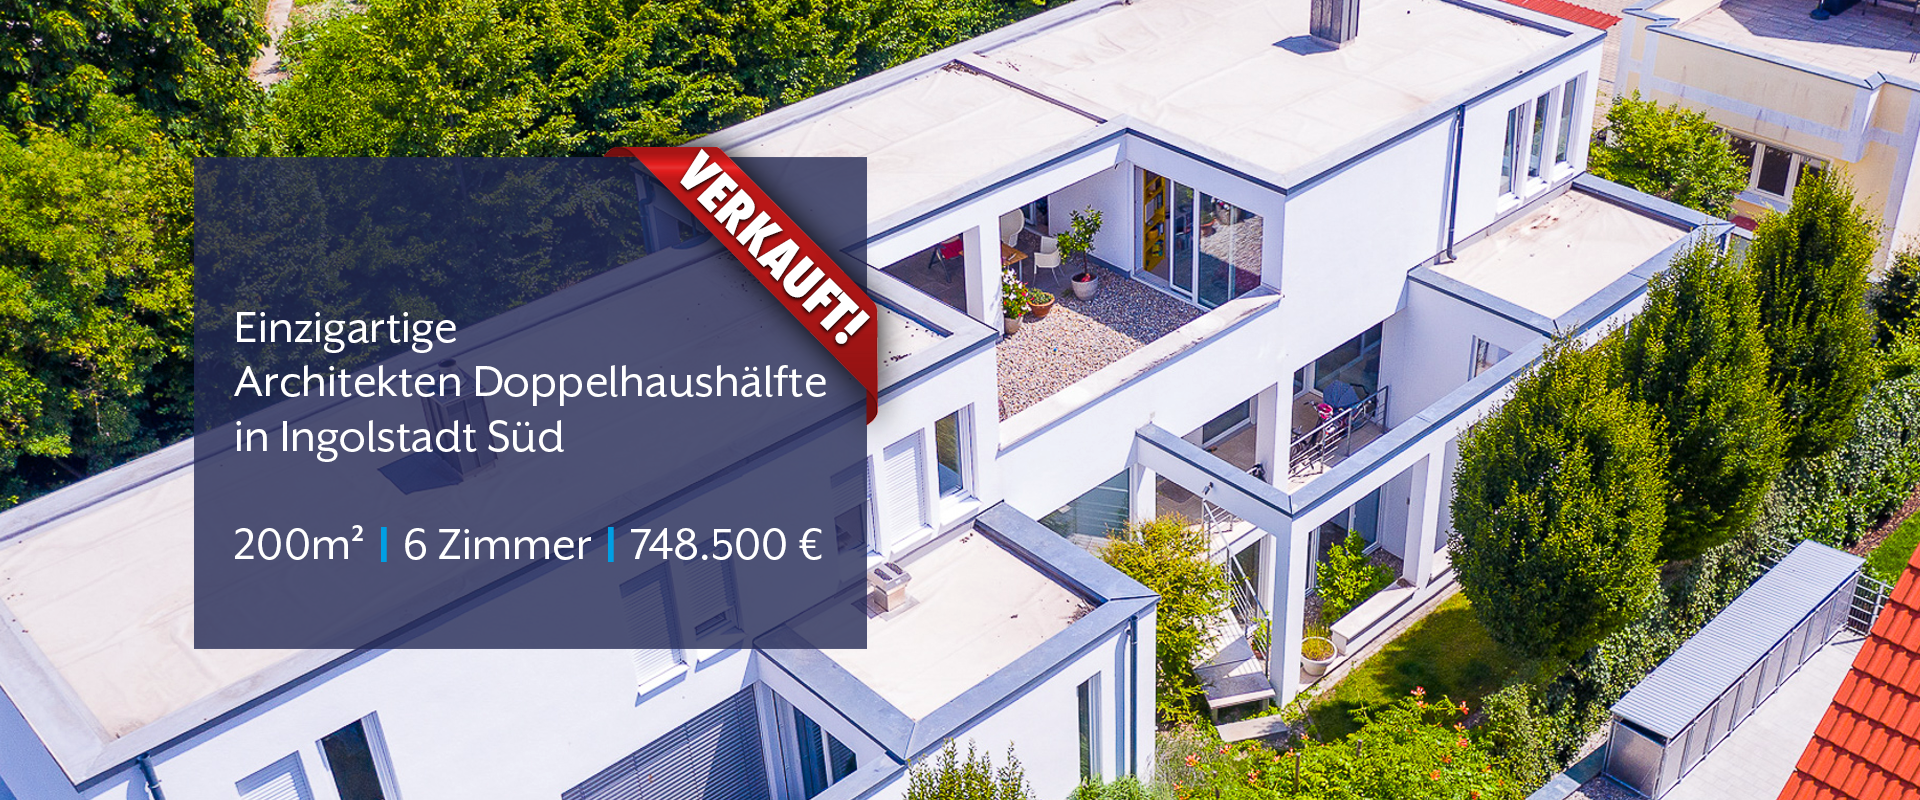 Unsere Angebote | DR Immobilien Ingolstadt